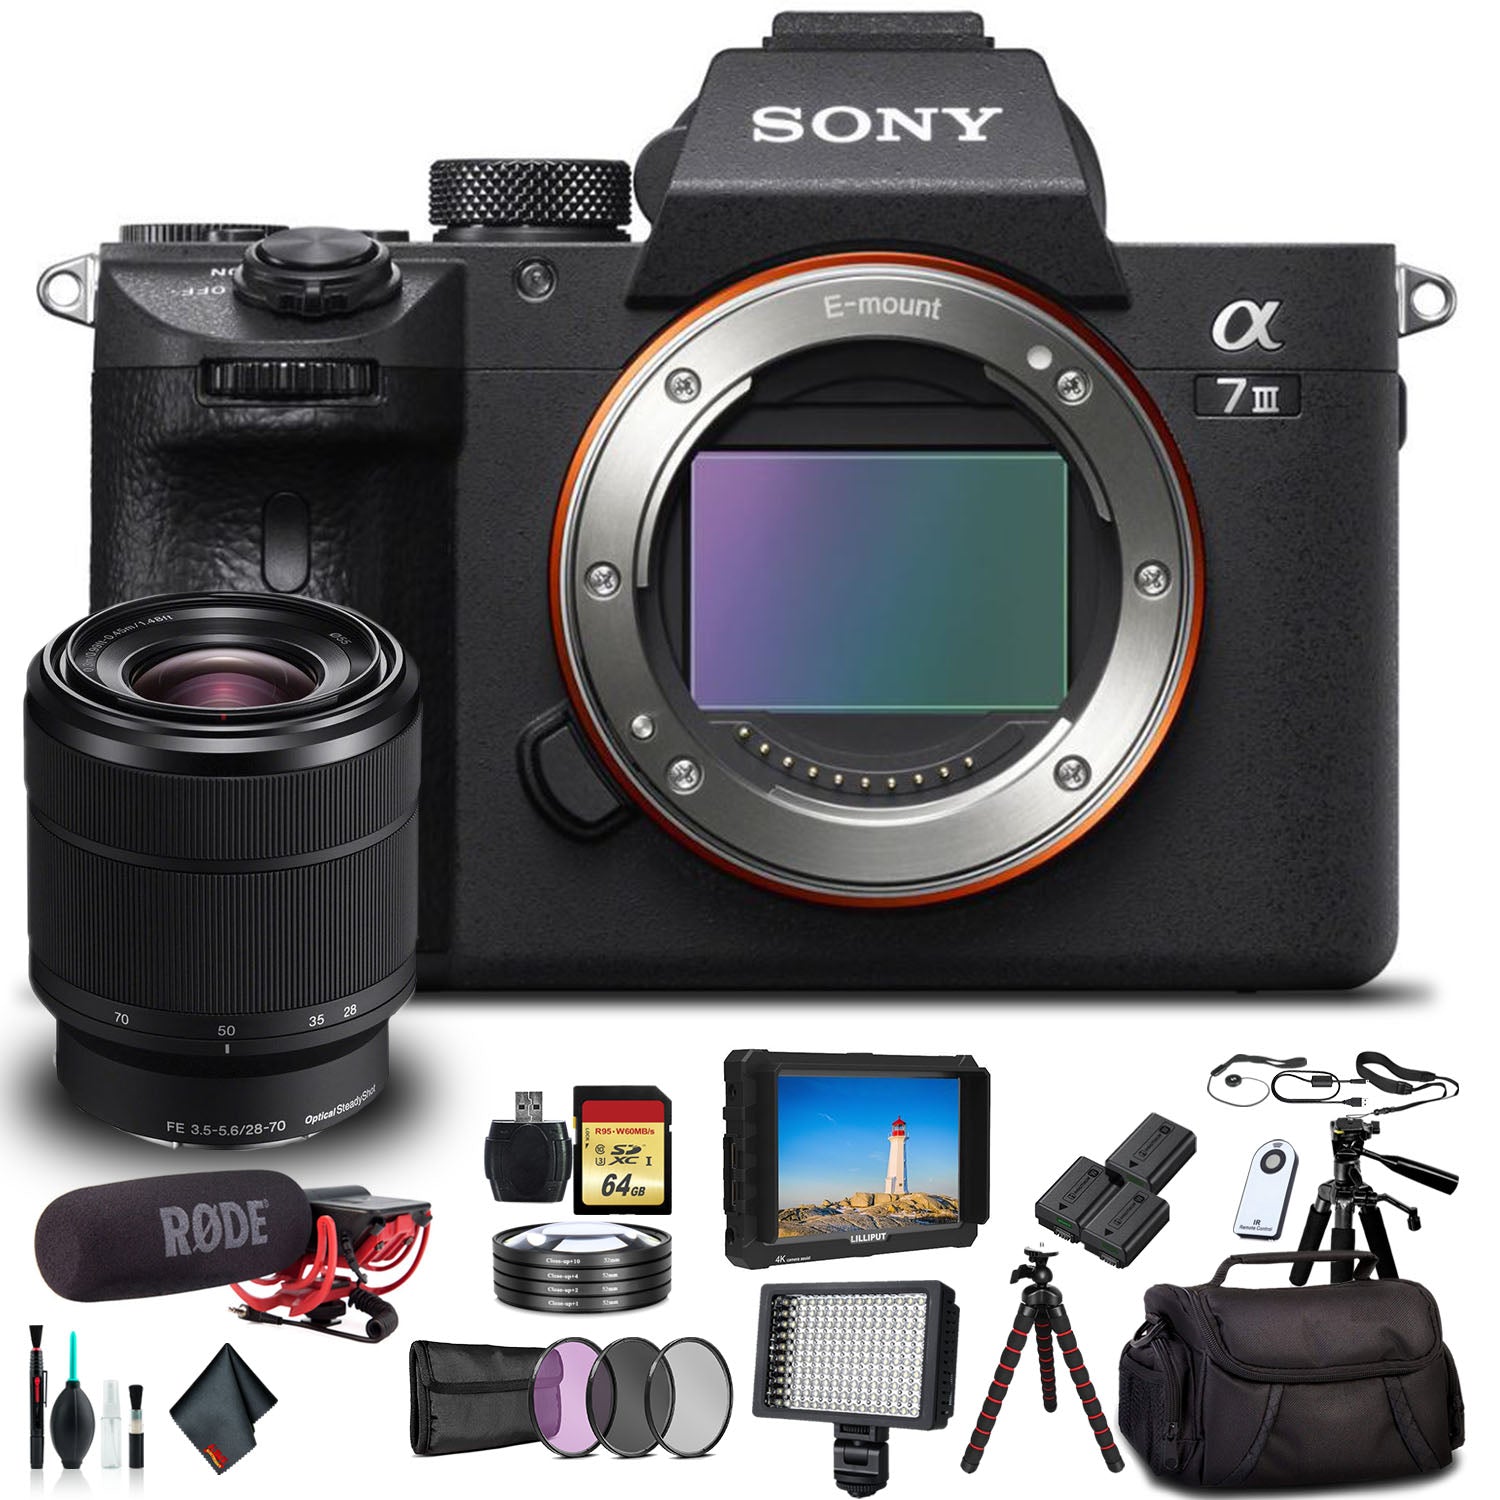 Sony Alpha a7 III Mirrorless Camera with 28-70mm Lens With Soft Bag, 2x Extra Batteries, Rode Mic, LED Light, External Monitor, 2x 64GB Memory Card, Sling Soft Bag, , Plus Essential Accessories